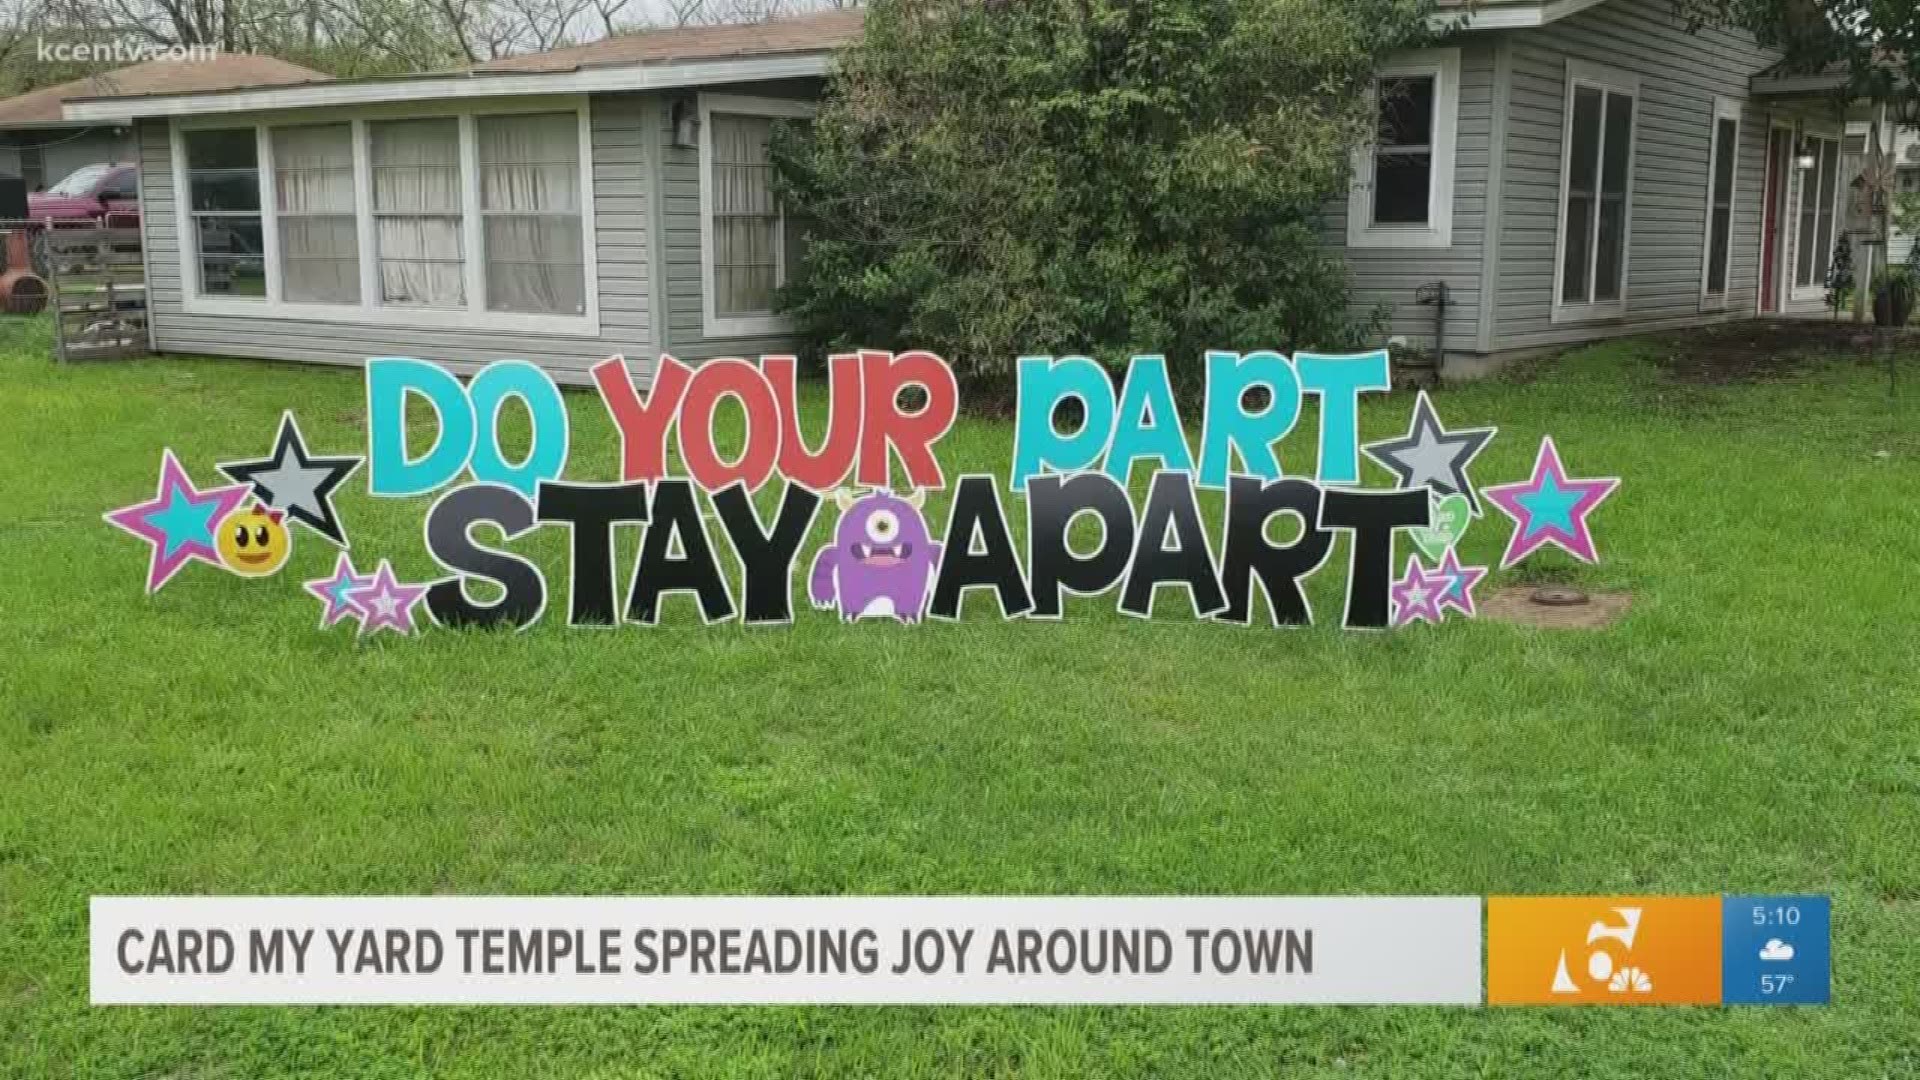 Card my Yard Temple has put up signs for staff at Baylor Scott & White as well as McLane's Children's Hospital.